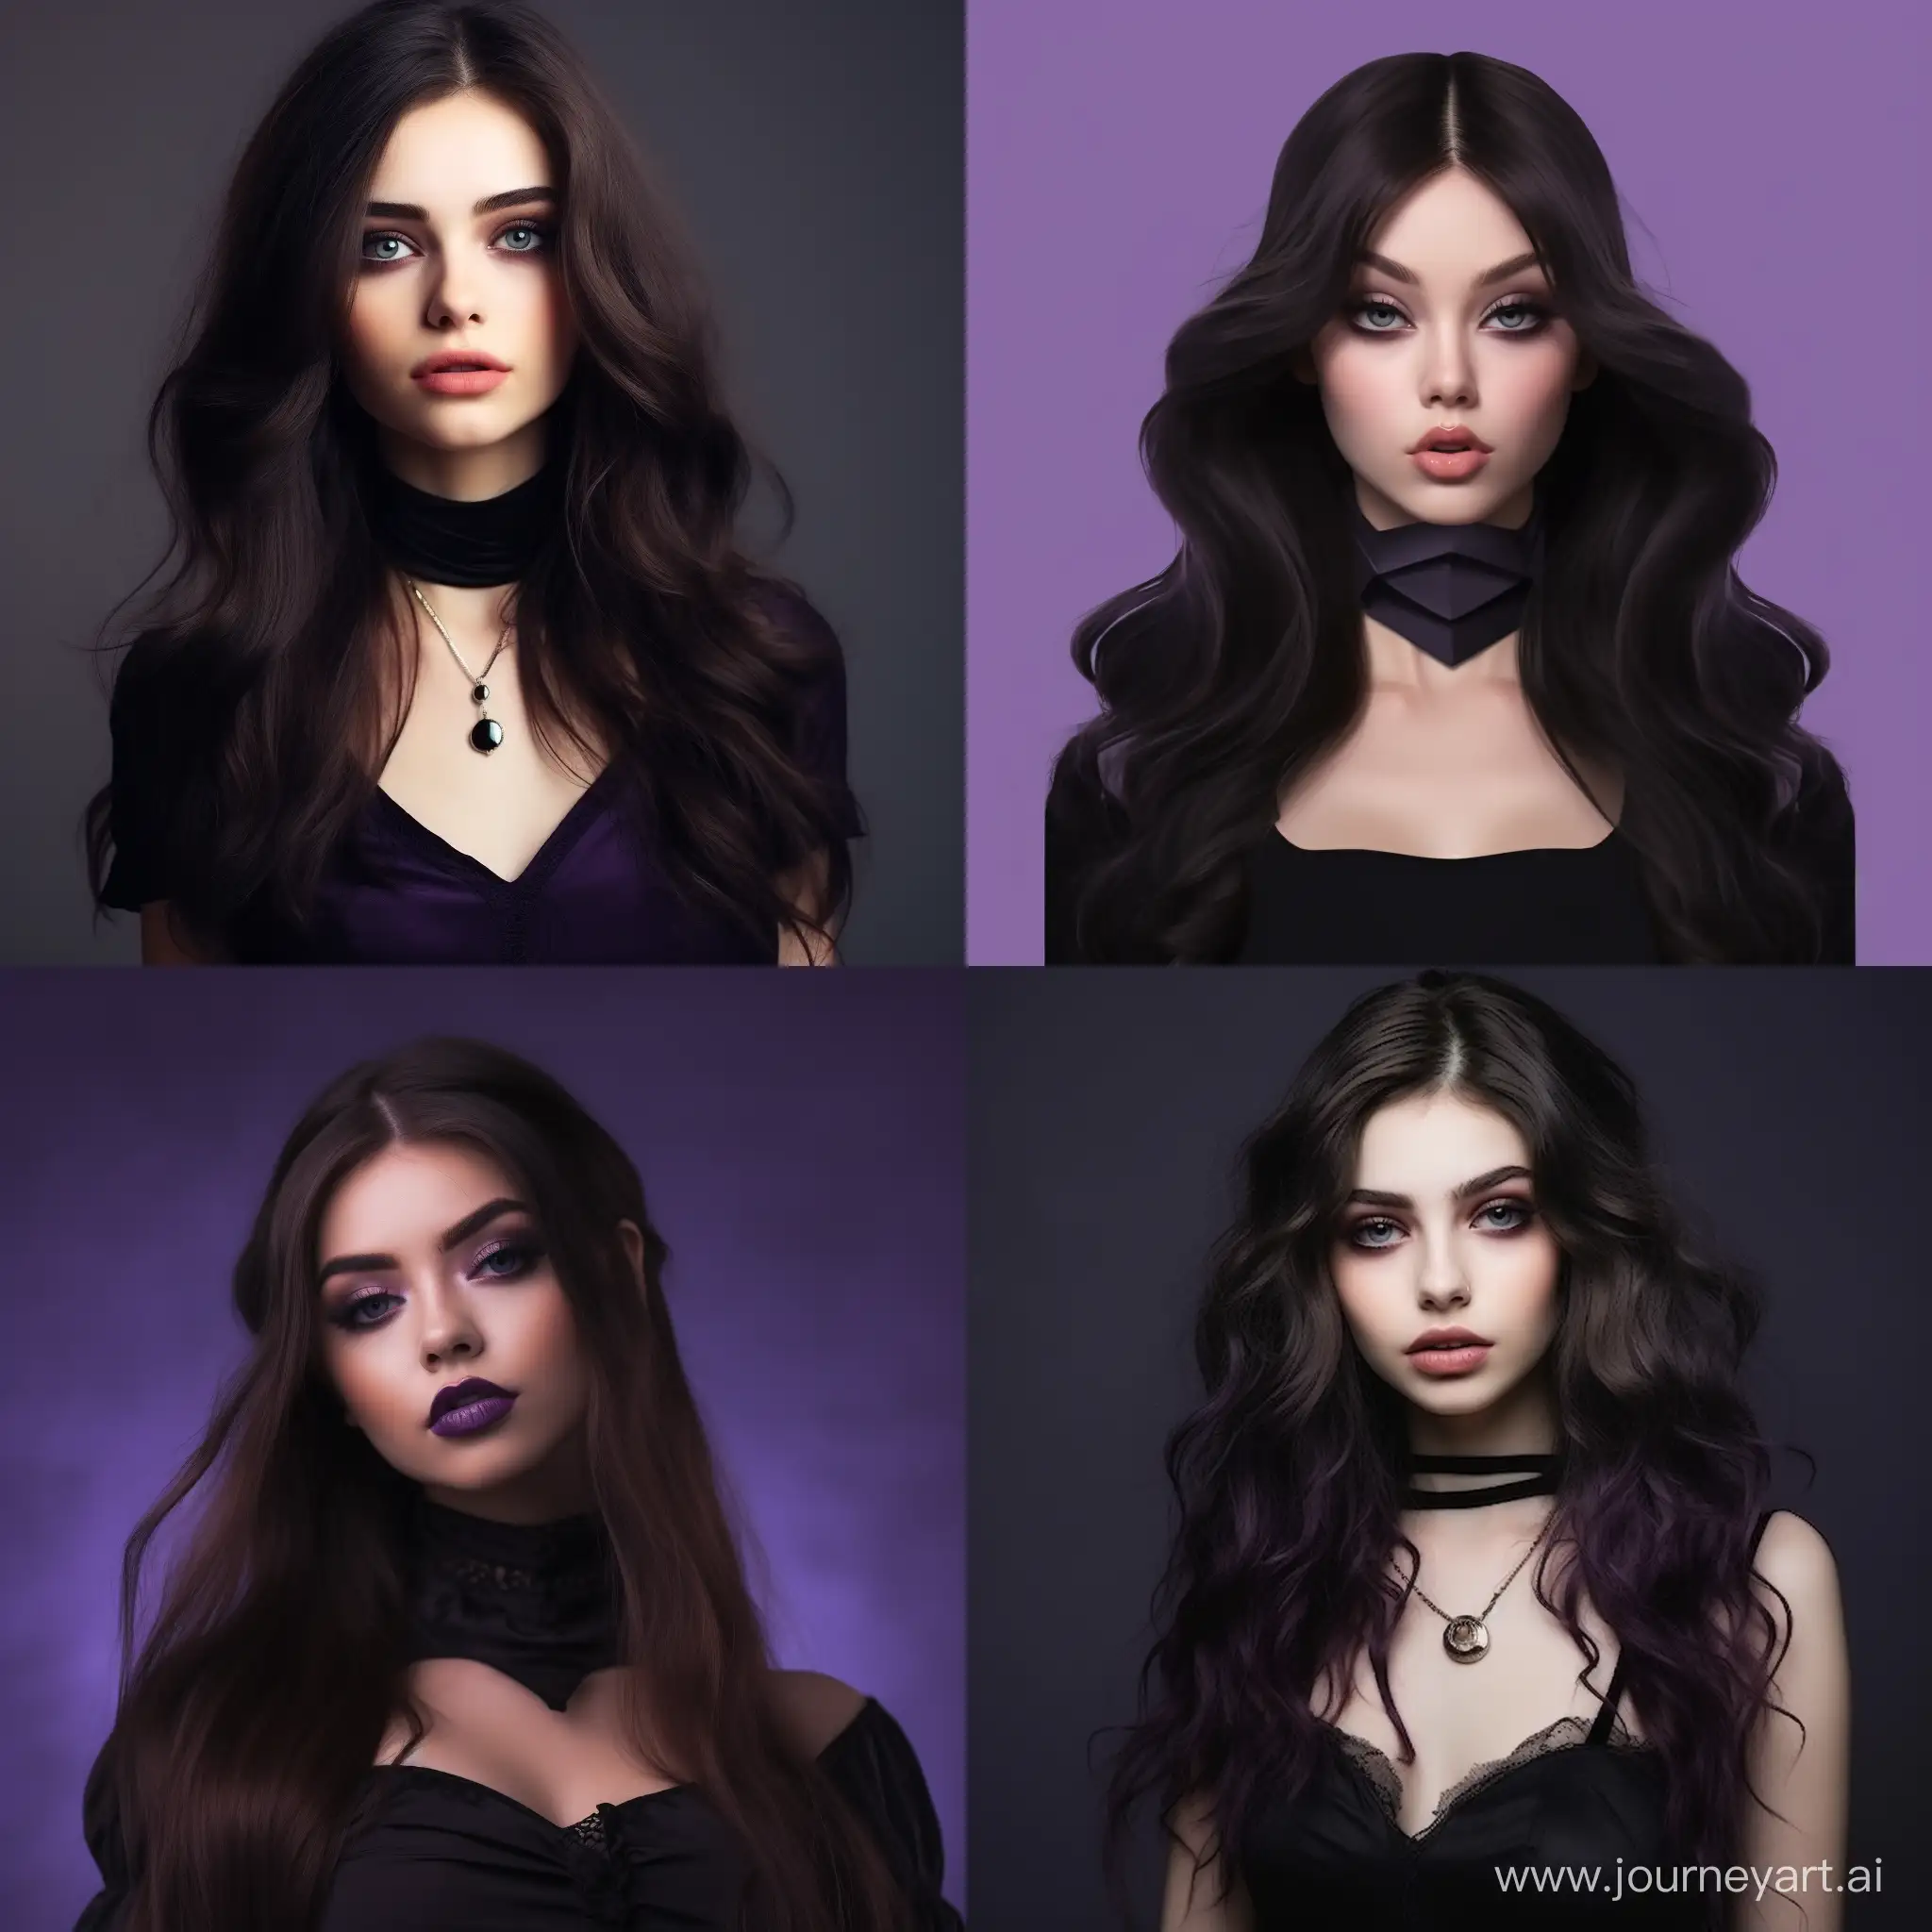 Captivating-European-Woman-with-Violet-Eyes-and-Long-Wavy-Hair-Wearing-a-Choker-AI-Art